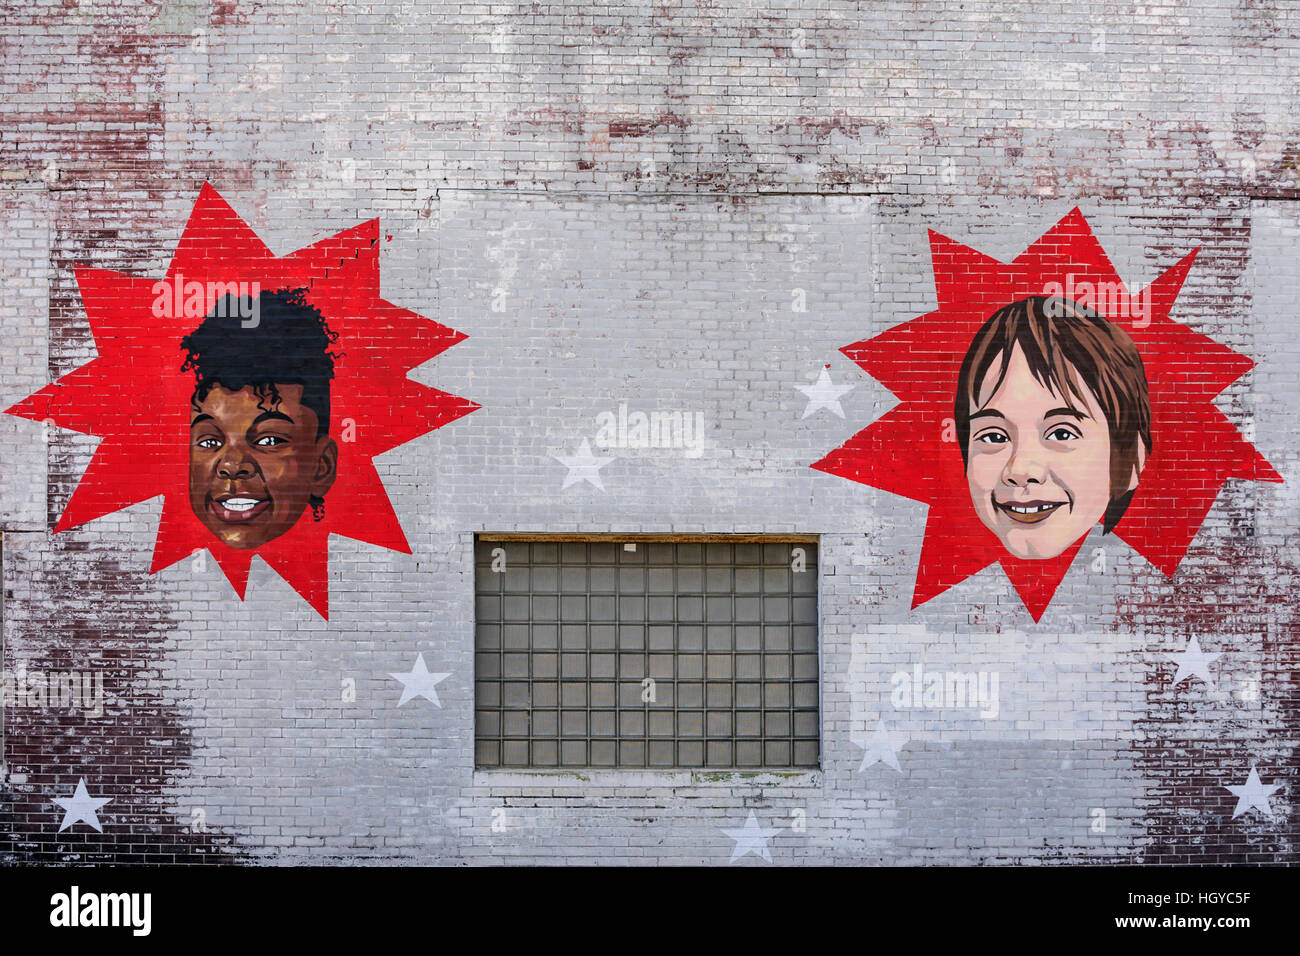 Mural paintings depicting white and Afro American children, Memphis, Tennessee, United States Stock Photo